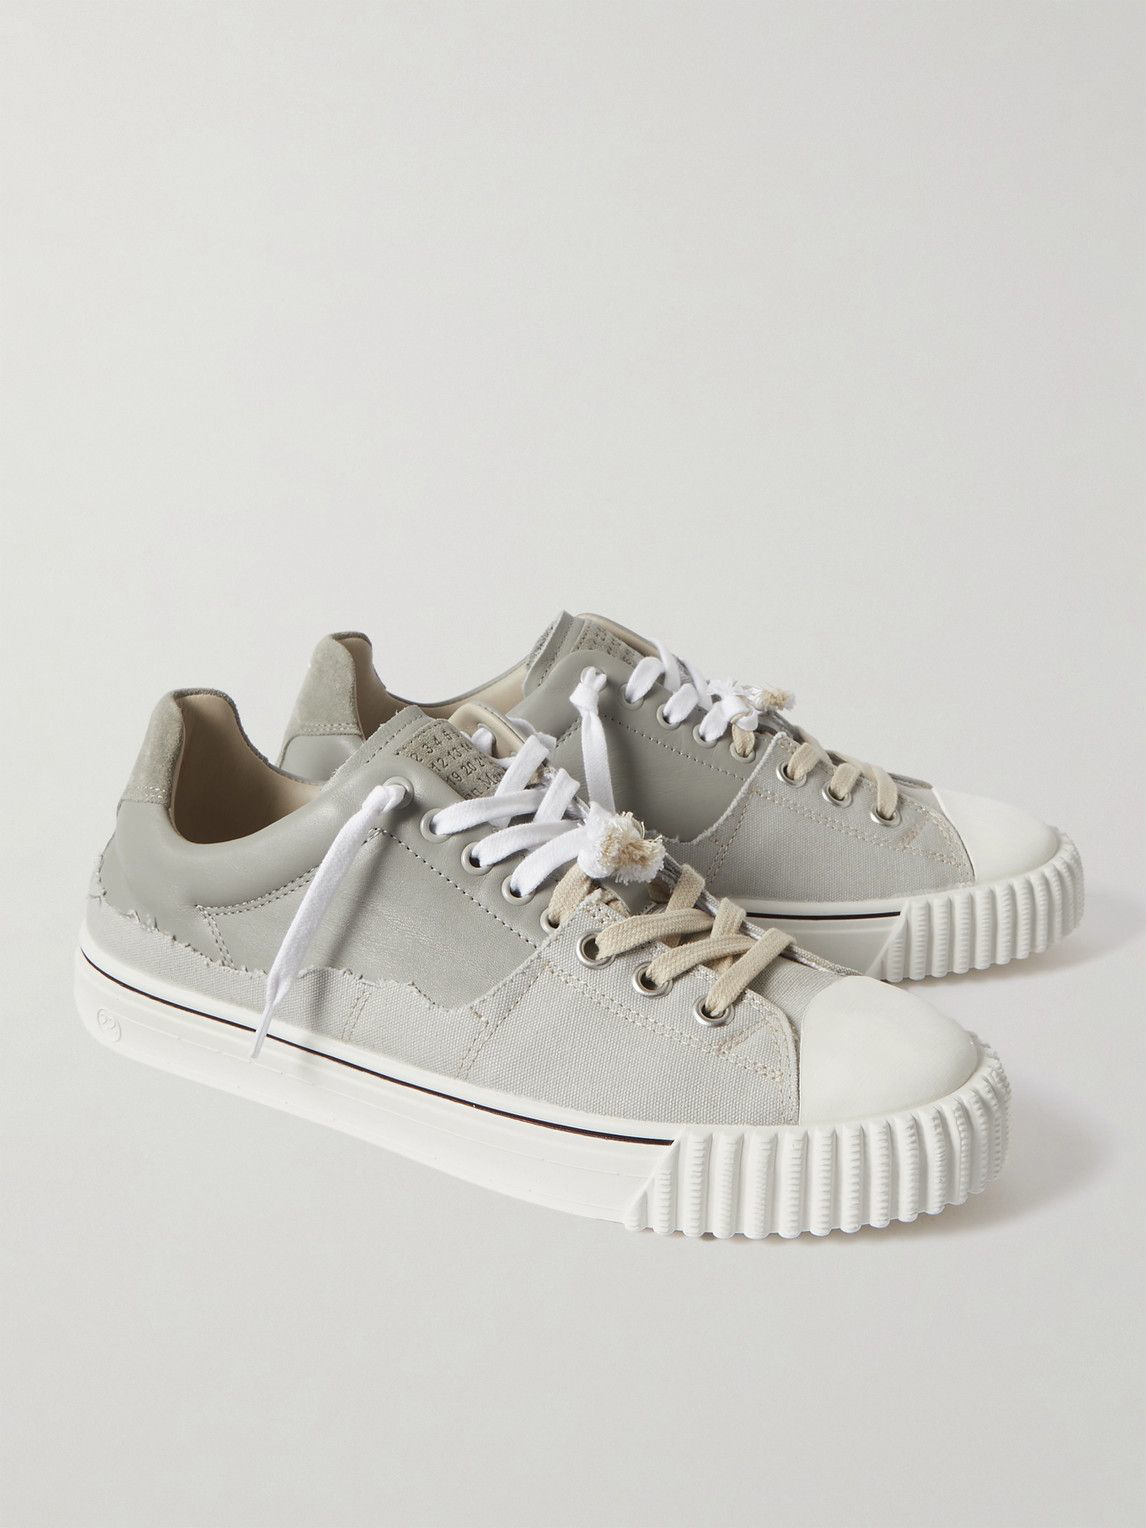 Maison Margiela - Evolution Distressed Canvas and Leather Sneakers